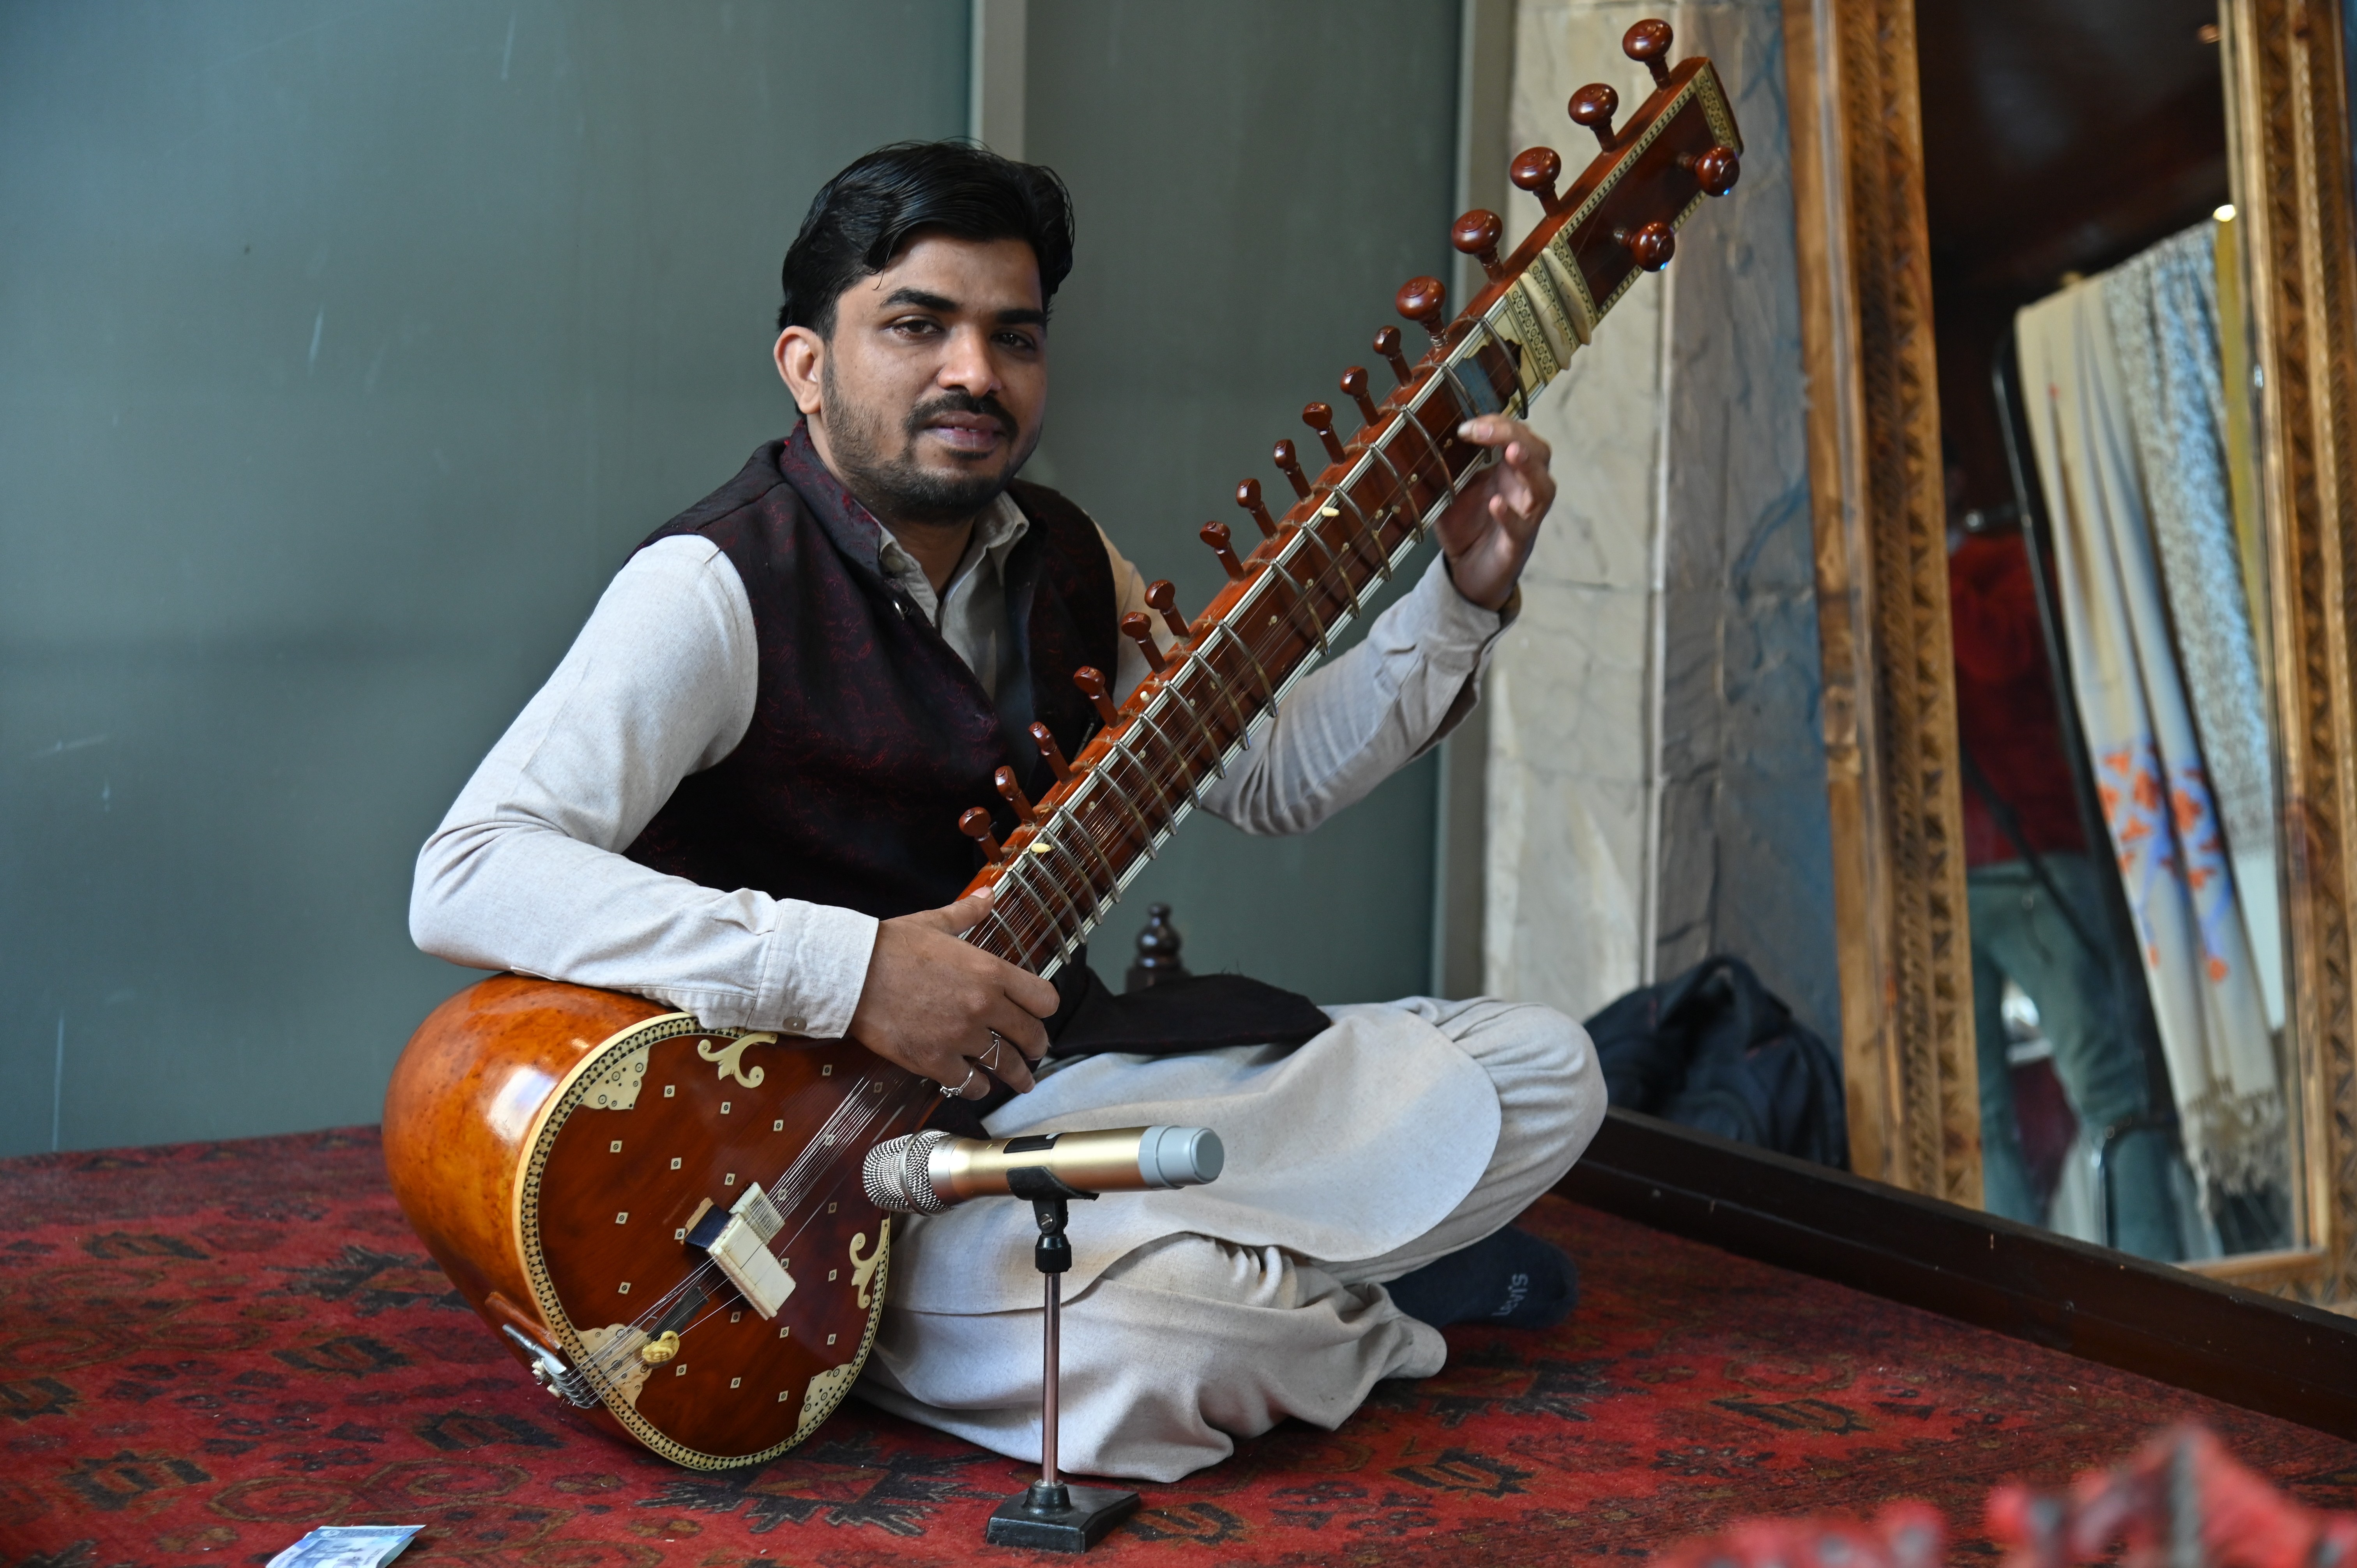 A musician playing Sitar: a plucked stringed instrument, originating from the subcontinent, flourished in the 18th century, and arrived at its present form in 19th-century.